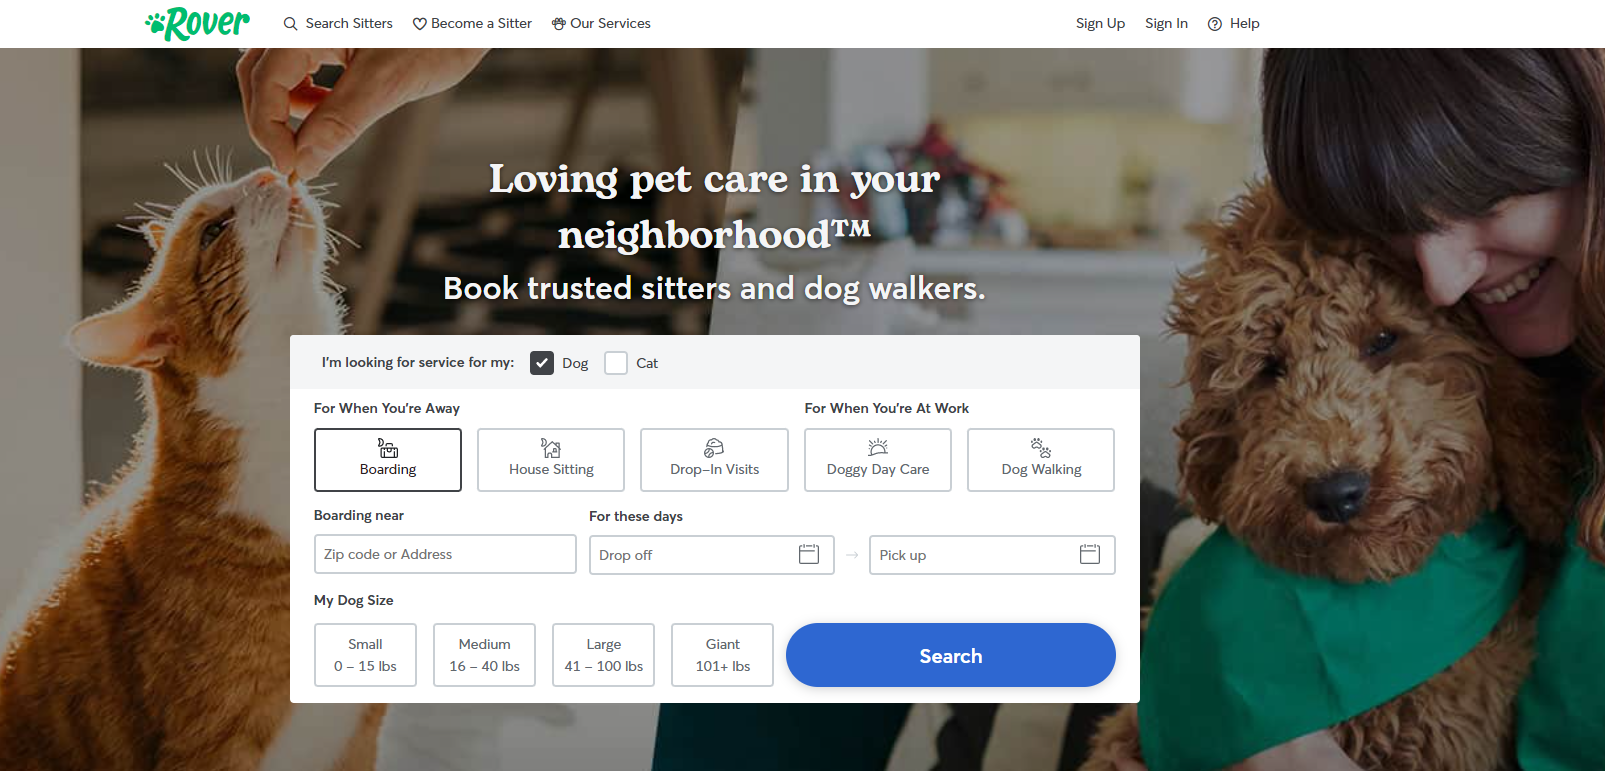 Rover is a marketplace with service offers